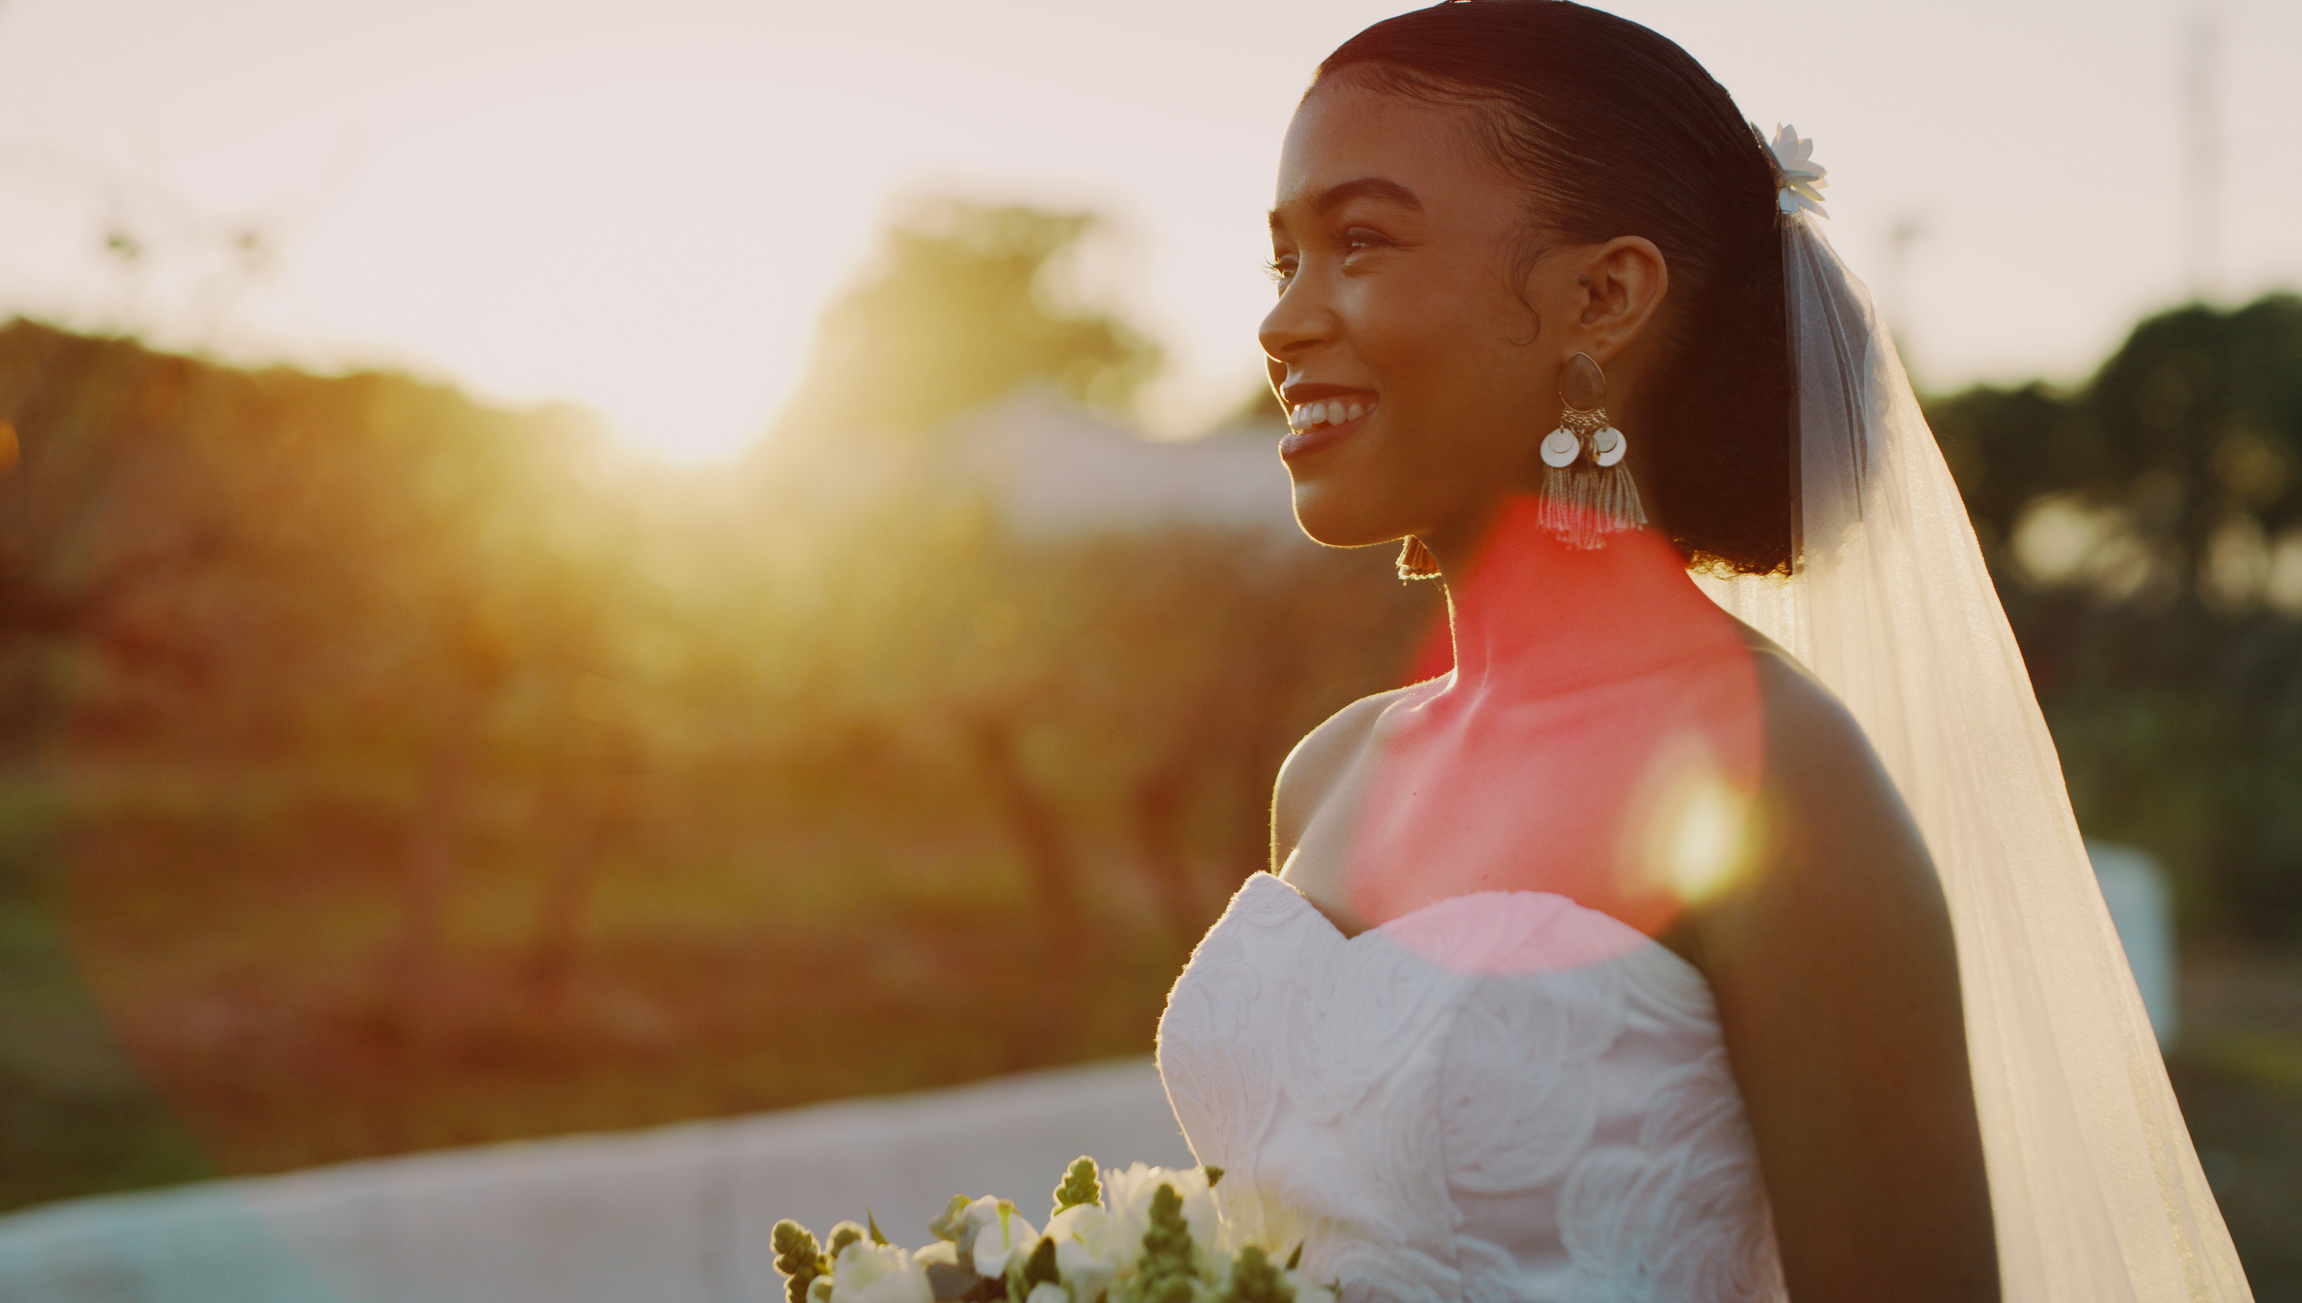 Smiling bride in a strapless wedding dress holding a bouquet, with a sunset background